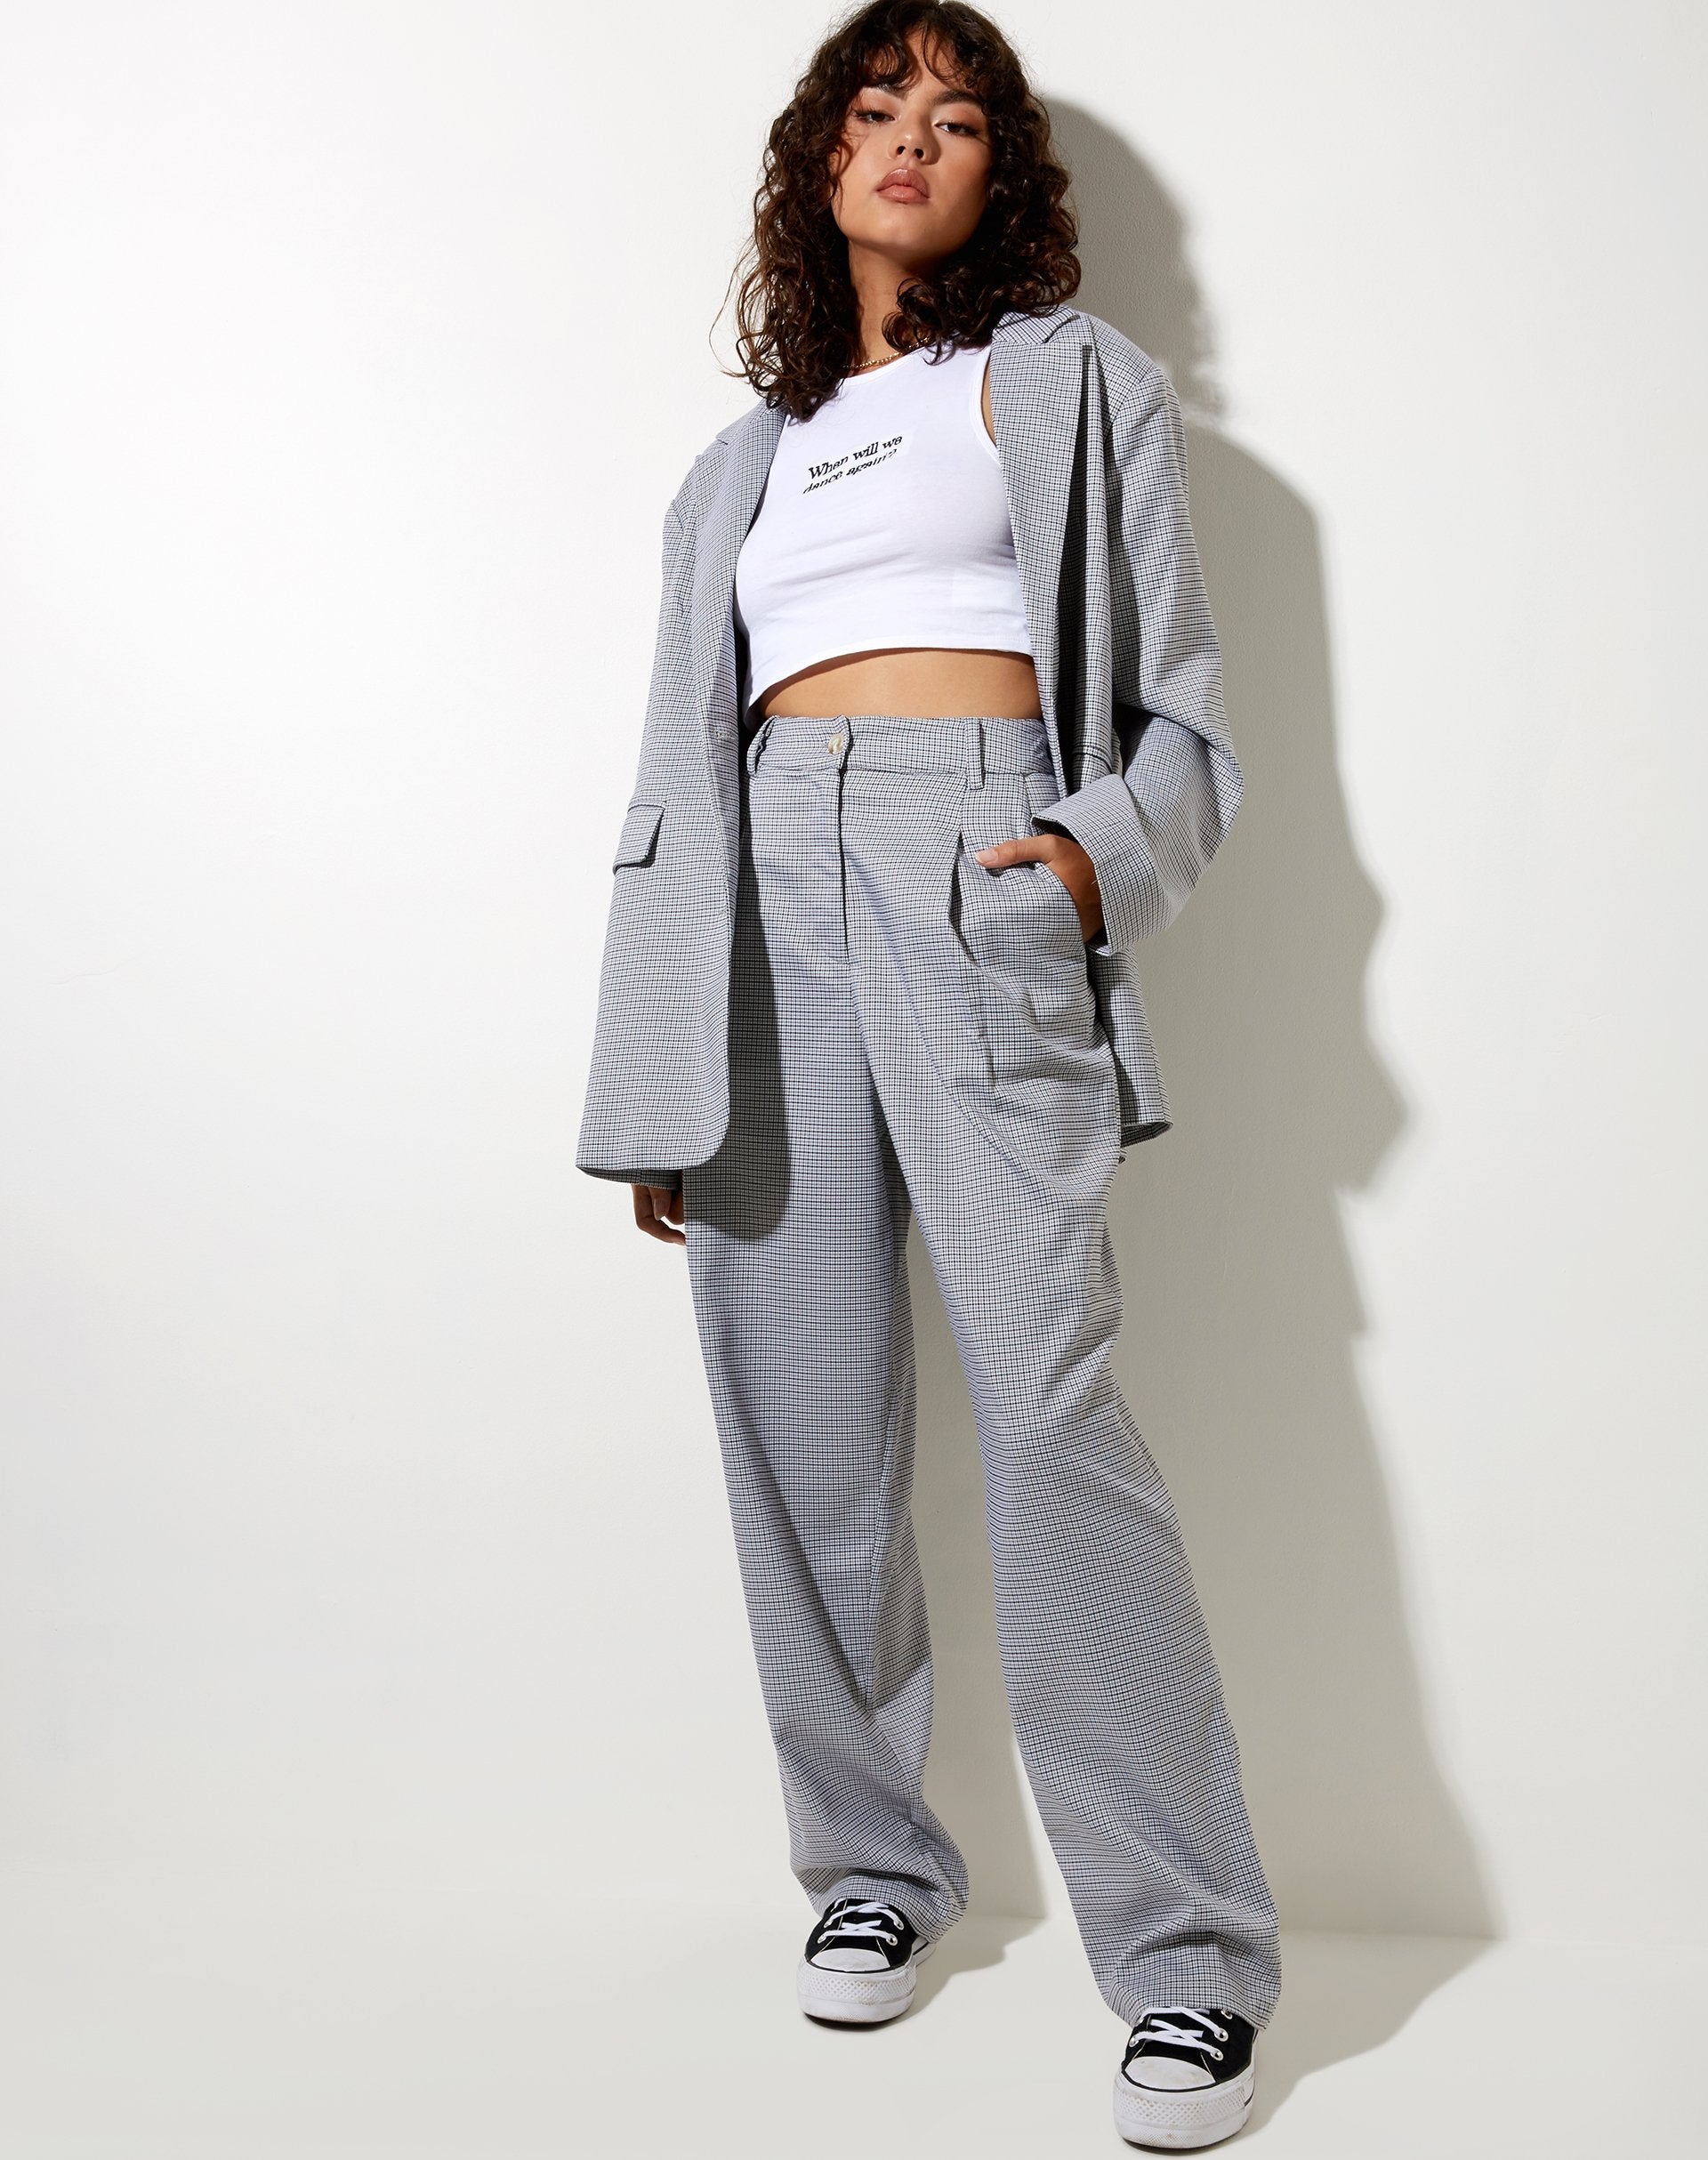 Image of Sakila Trouser in Small Check Black Grey